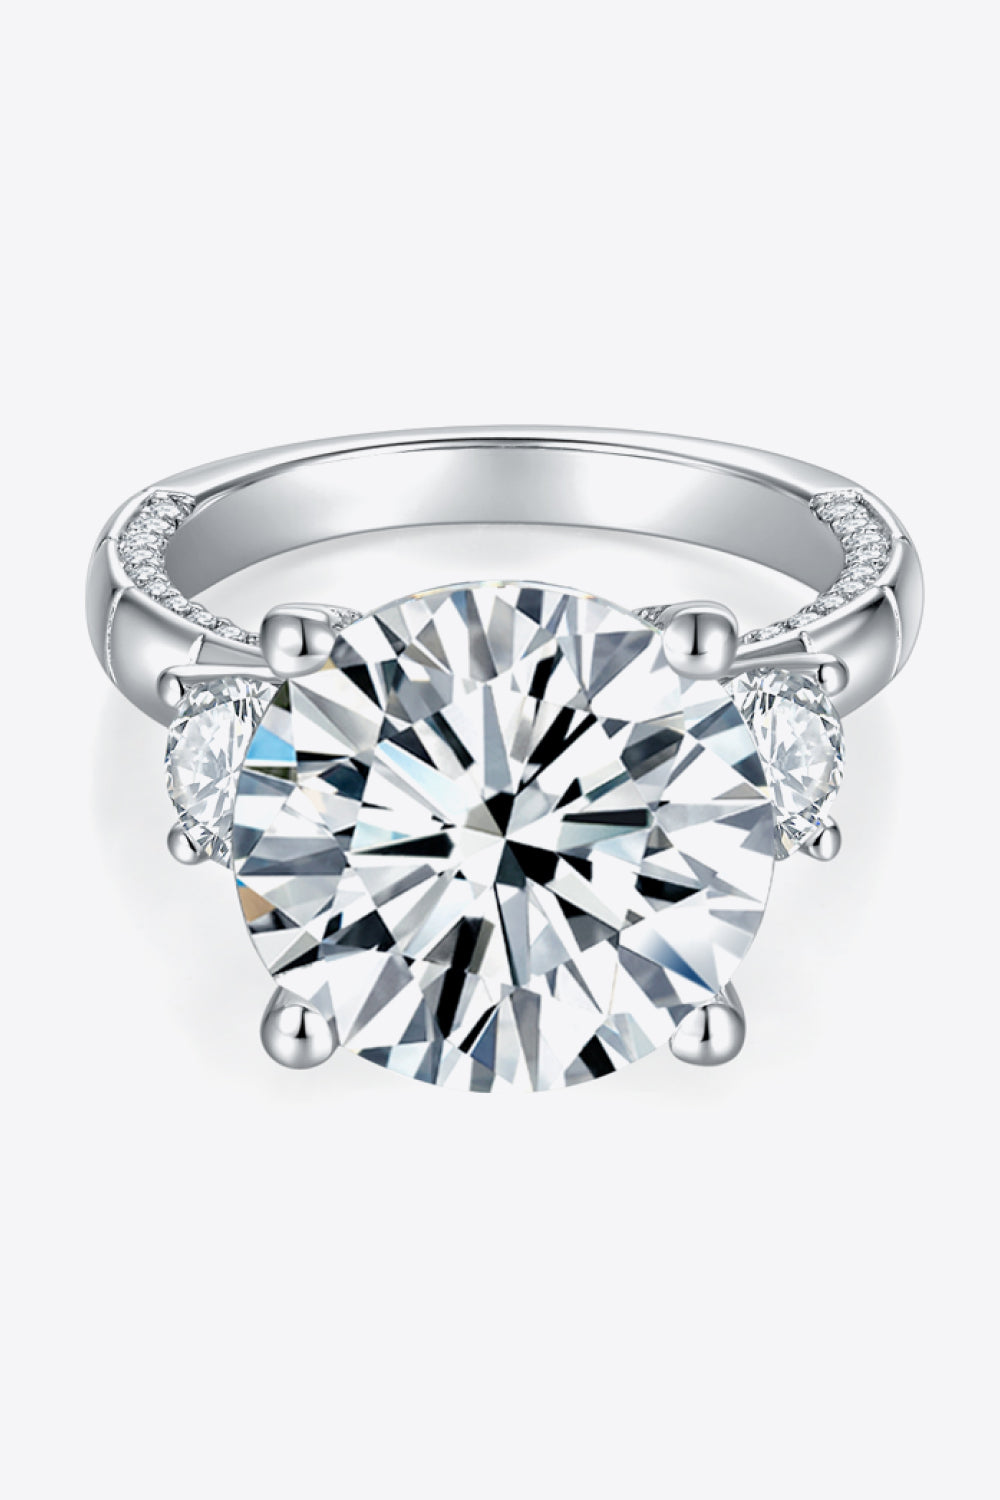 The Marilyn - 8.6 Carat Moissanite Platinum-Plated Ring